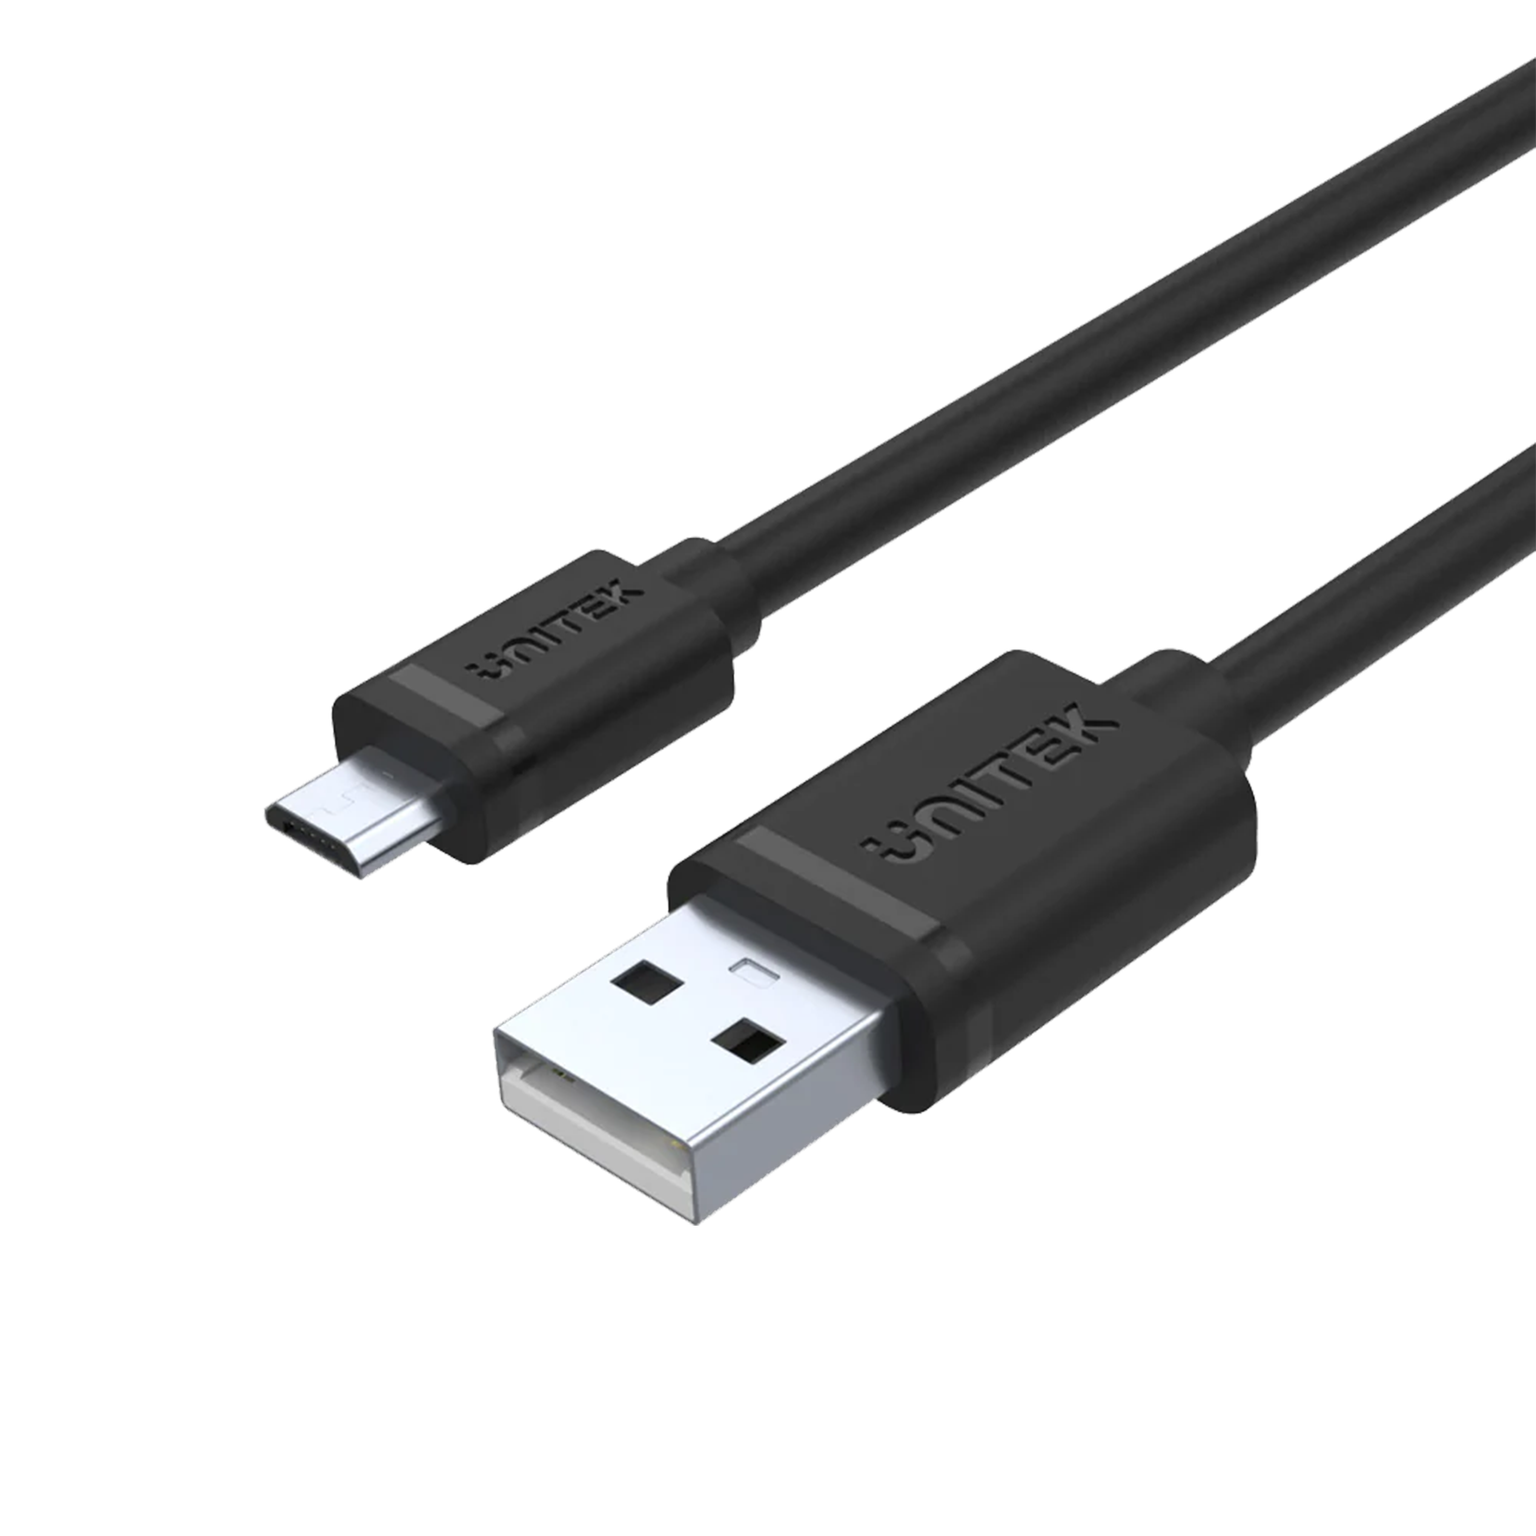 USB 2.0 A MAle to Micro B Male